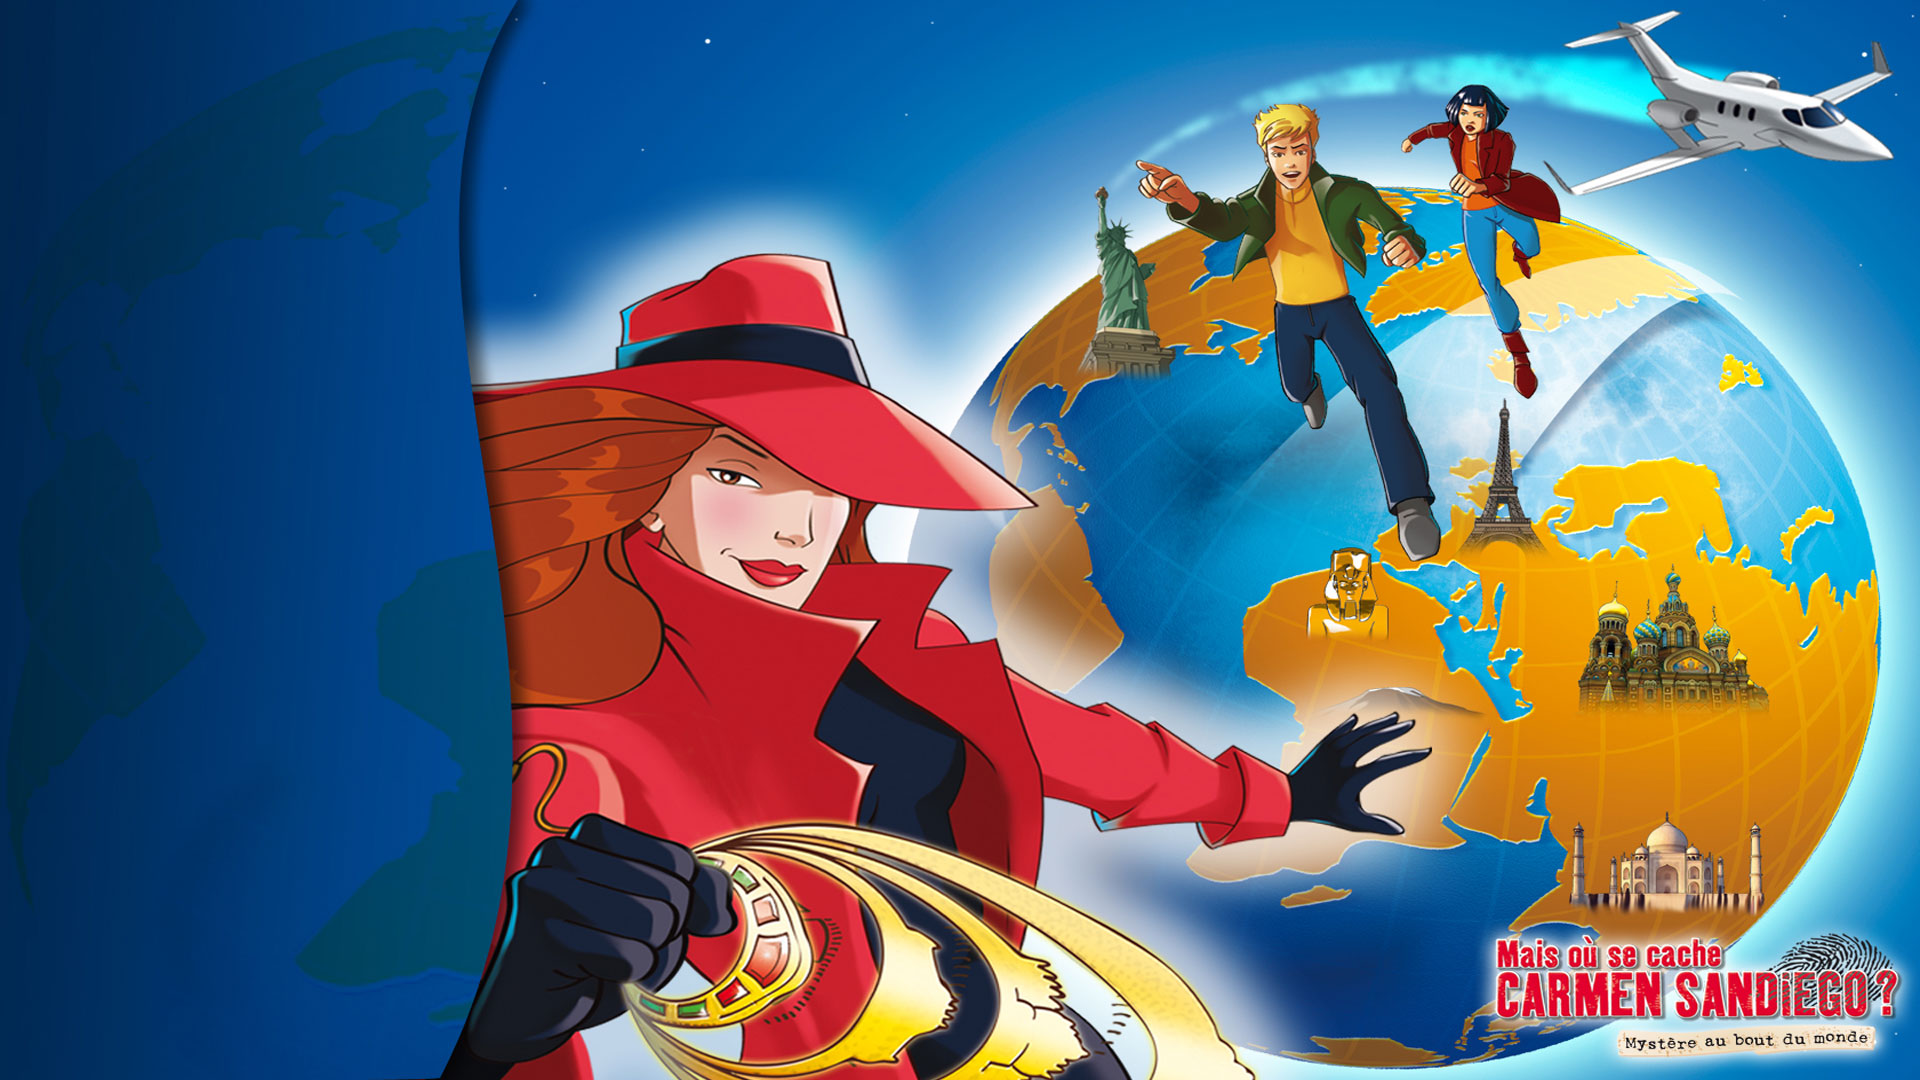 Let’s Play Where in the World is Carmen Sandiego?